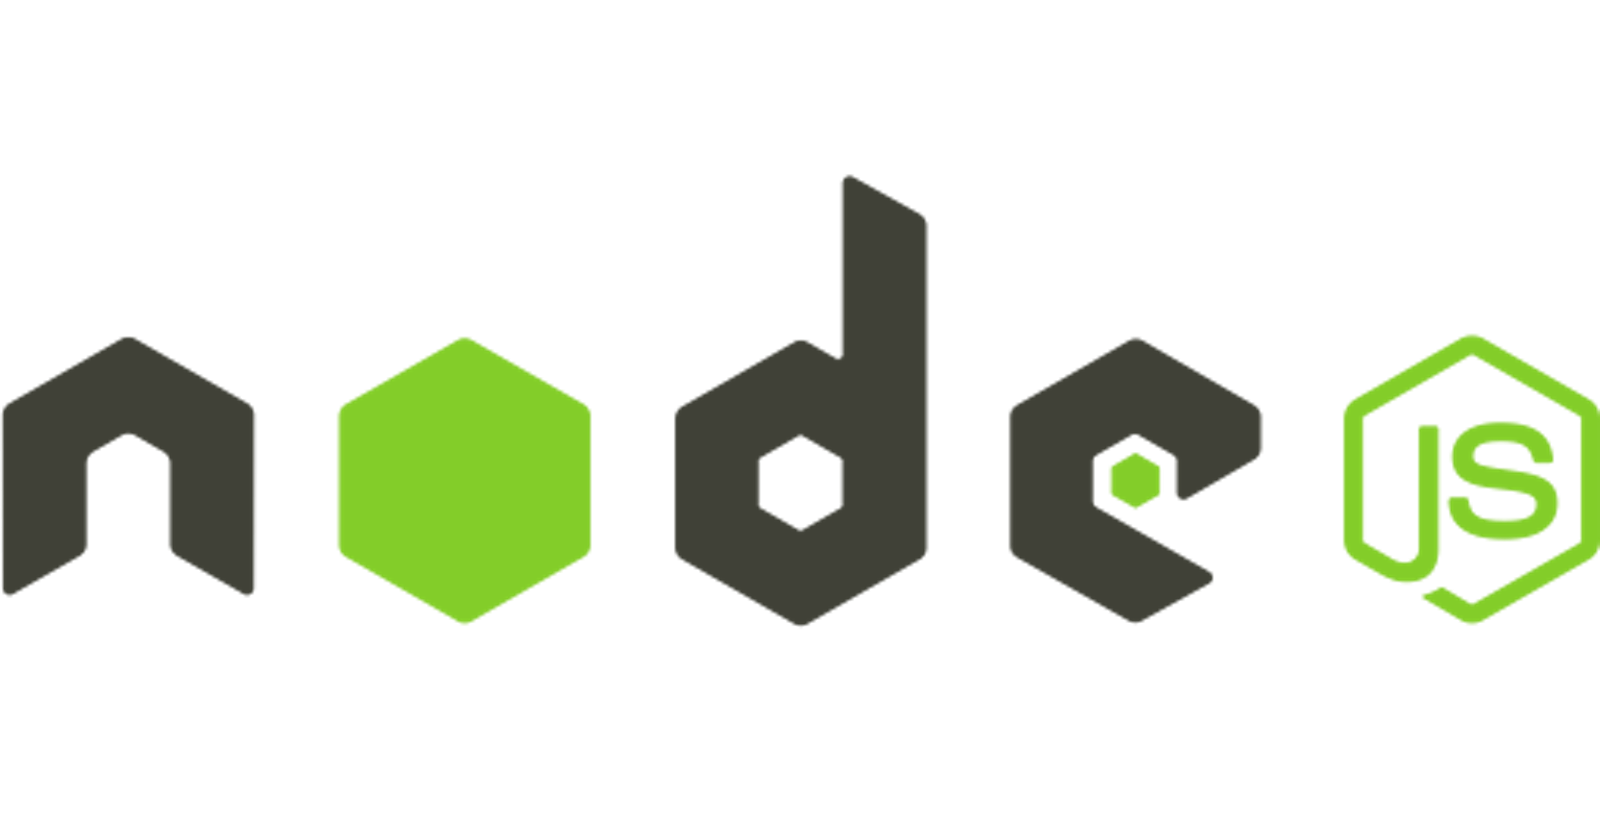 CREATE A PROJECT WITH NODE, EXPRESS AND EJS